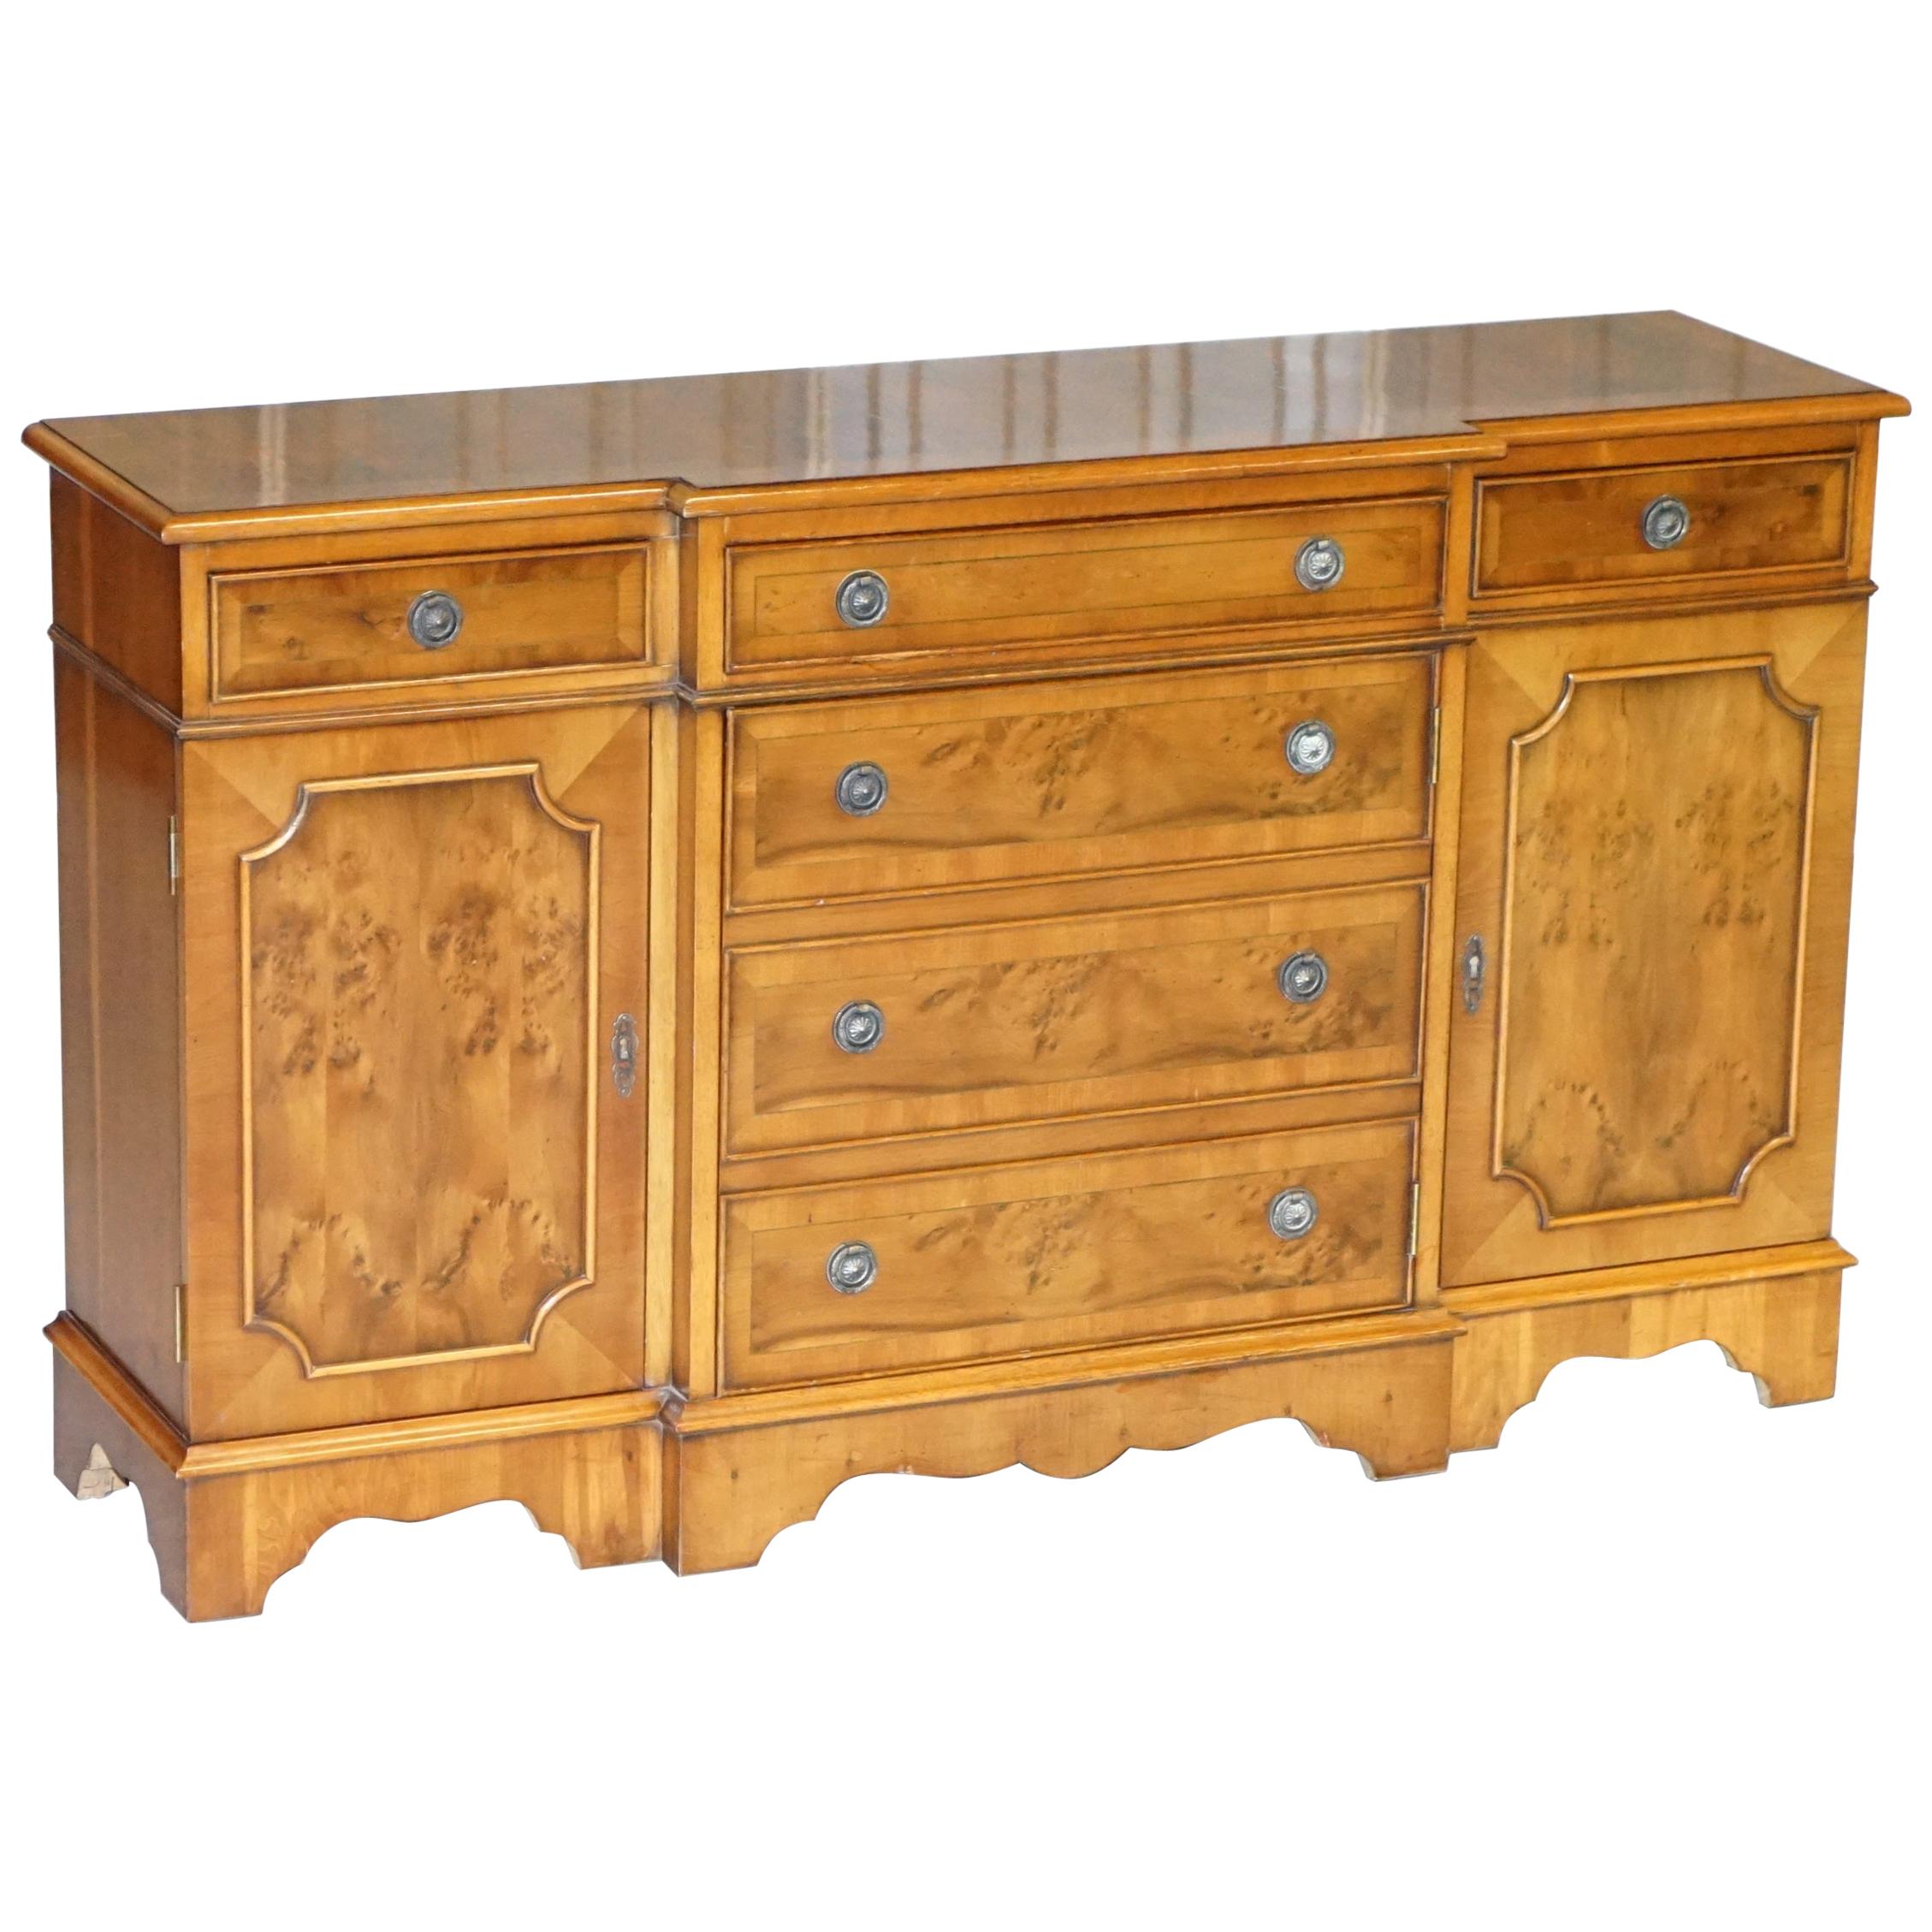 Burr & Burl Yew Wood Faux Drawer Fronted Library Bookcase Sideboard with Shelves For Sale